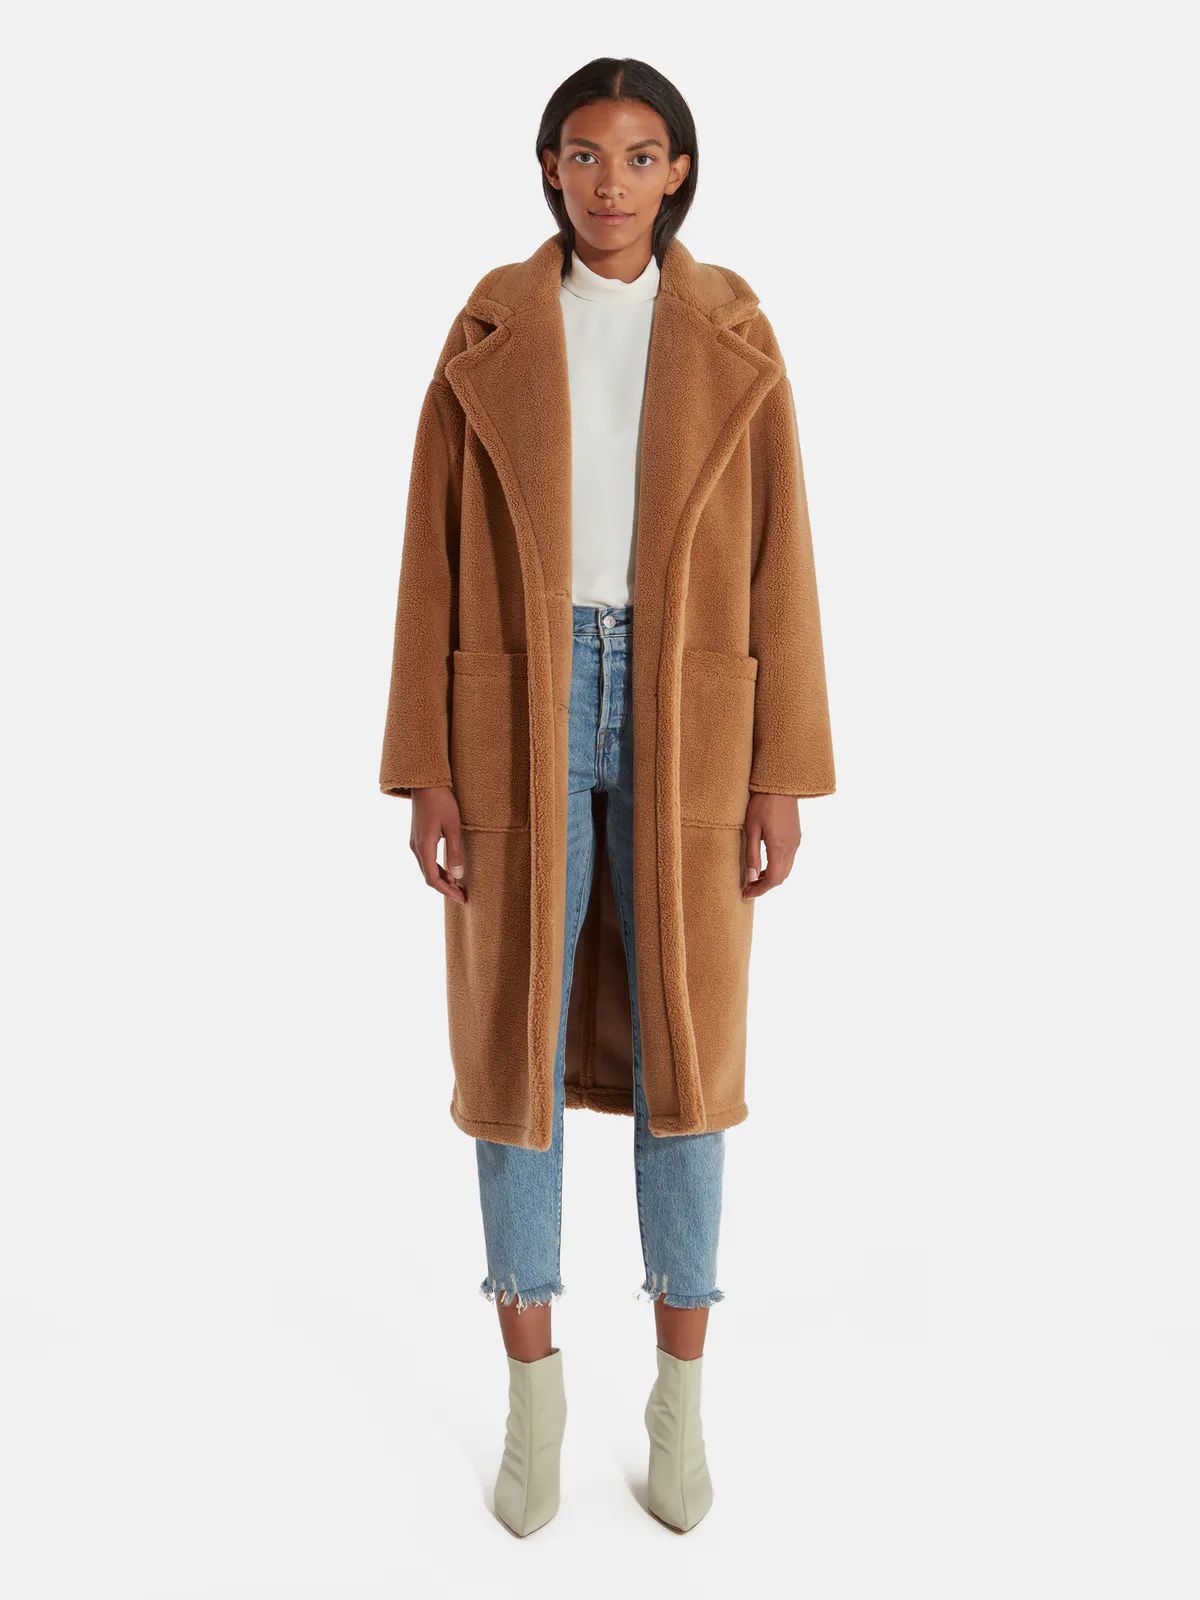 Bronte Faux Shearling Trench Coat | Verishop